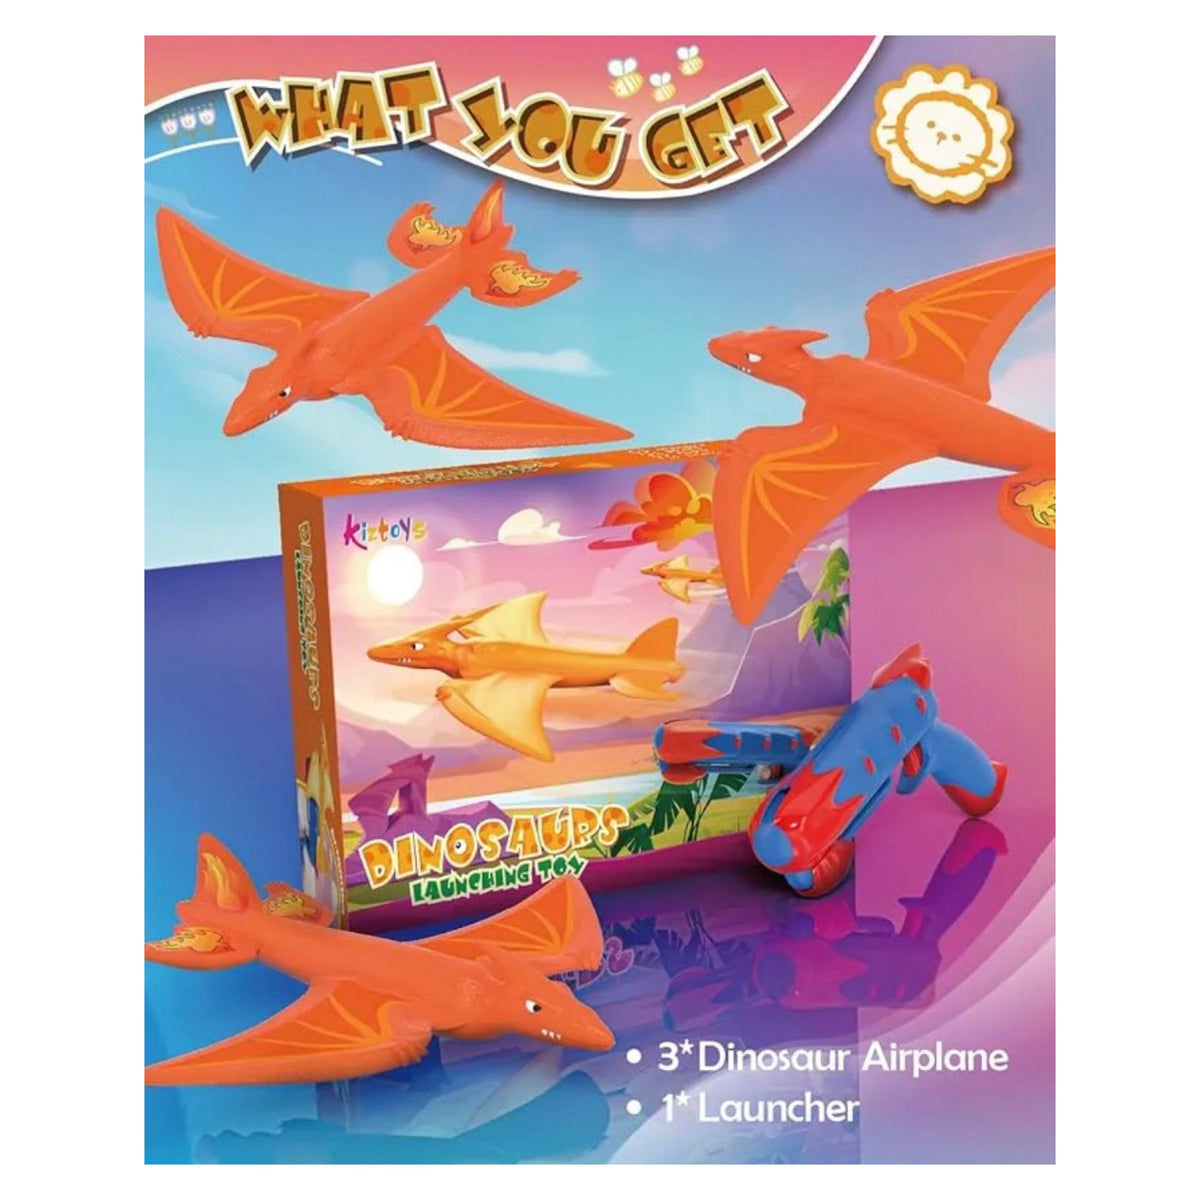 Foam Dinosaurs Launching Toy - Includes 3 Dinosaurs, Soars Up To 40ft!